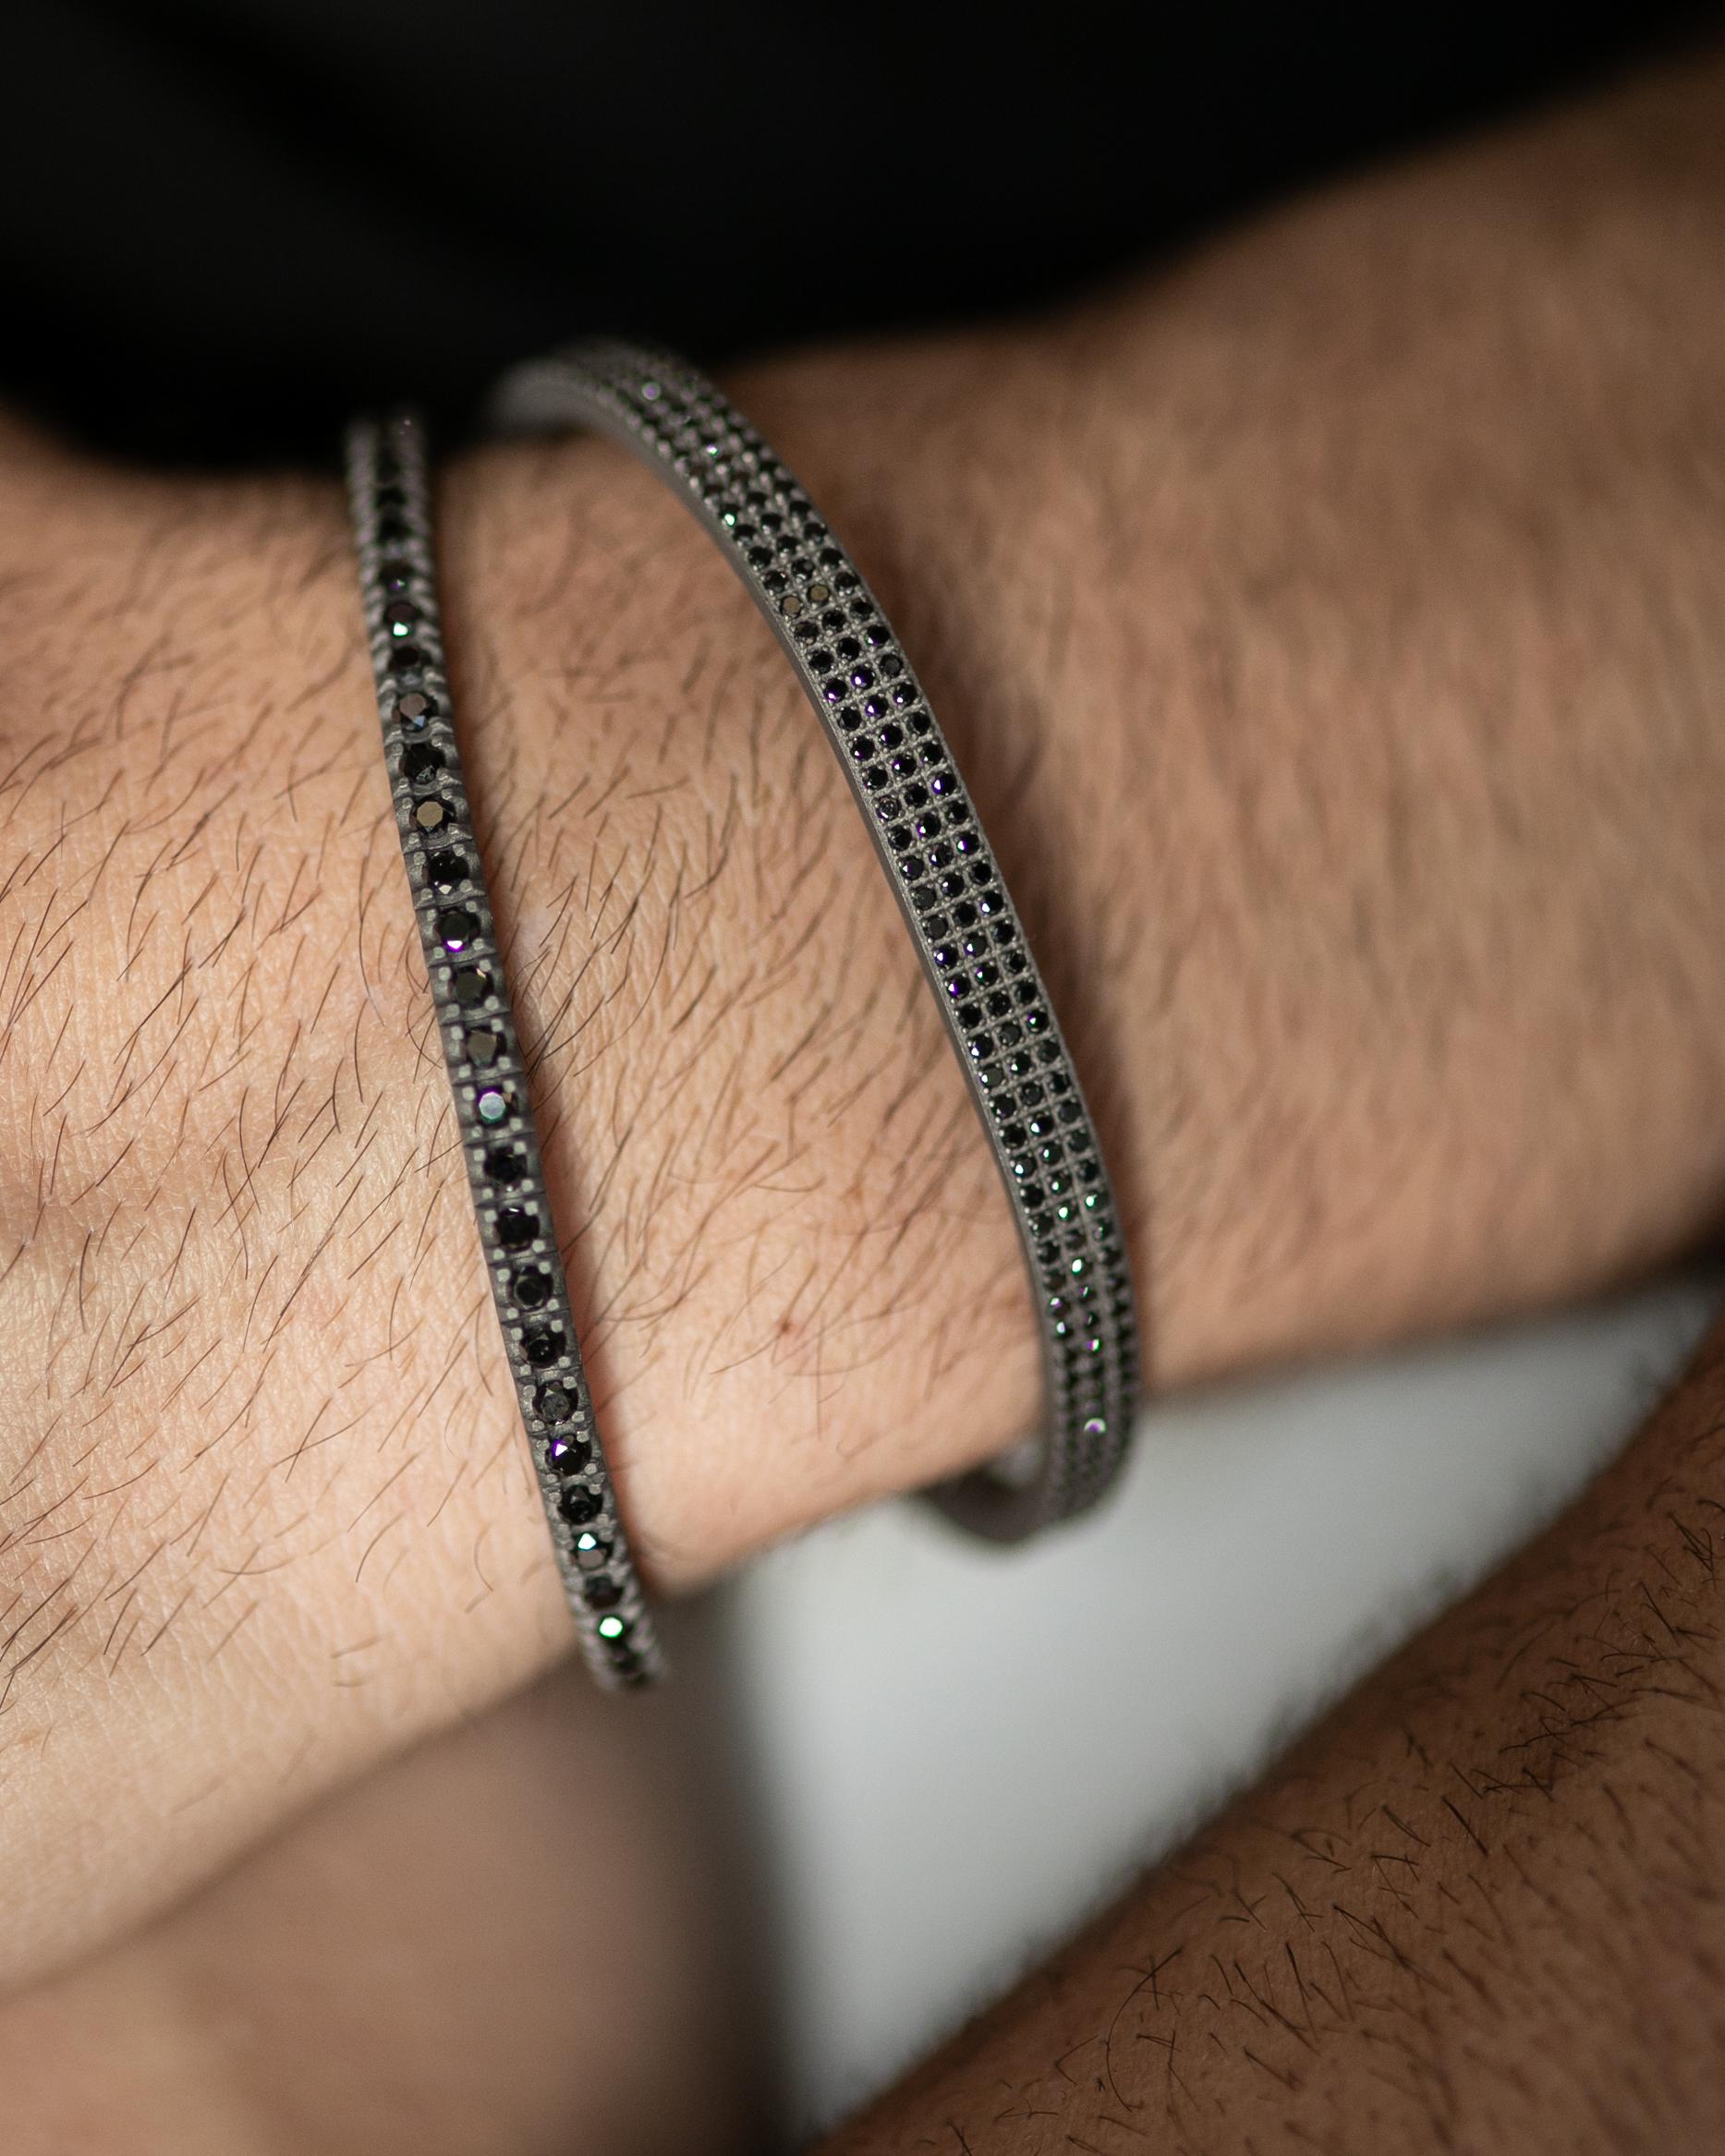 This titanium flexible bracelet is from our Men's collection. Bracelet is decorated by 58 beautiful natural black diamonds in total of 3.36 Carat and with 18K rose gold details. The diameter of the bracelet is 6.5 cm. Perfect for any day!

The men’s